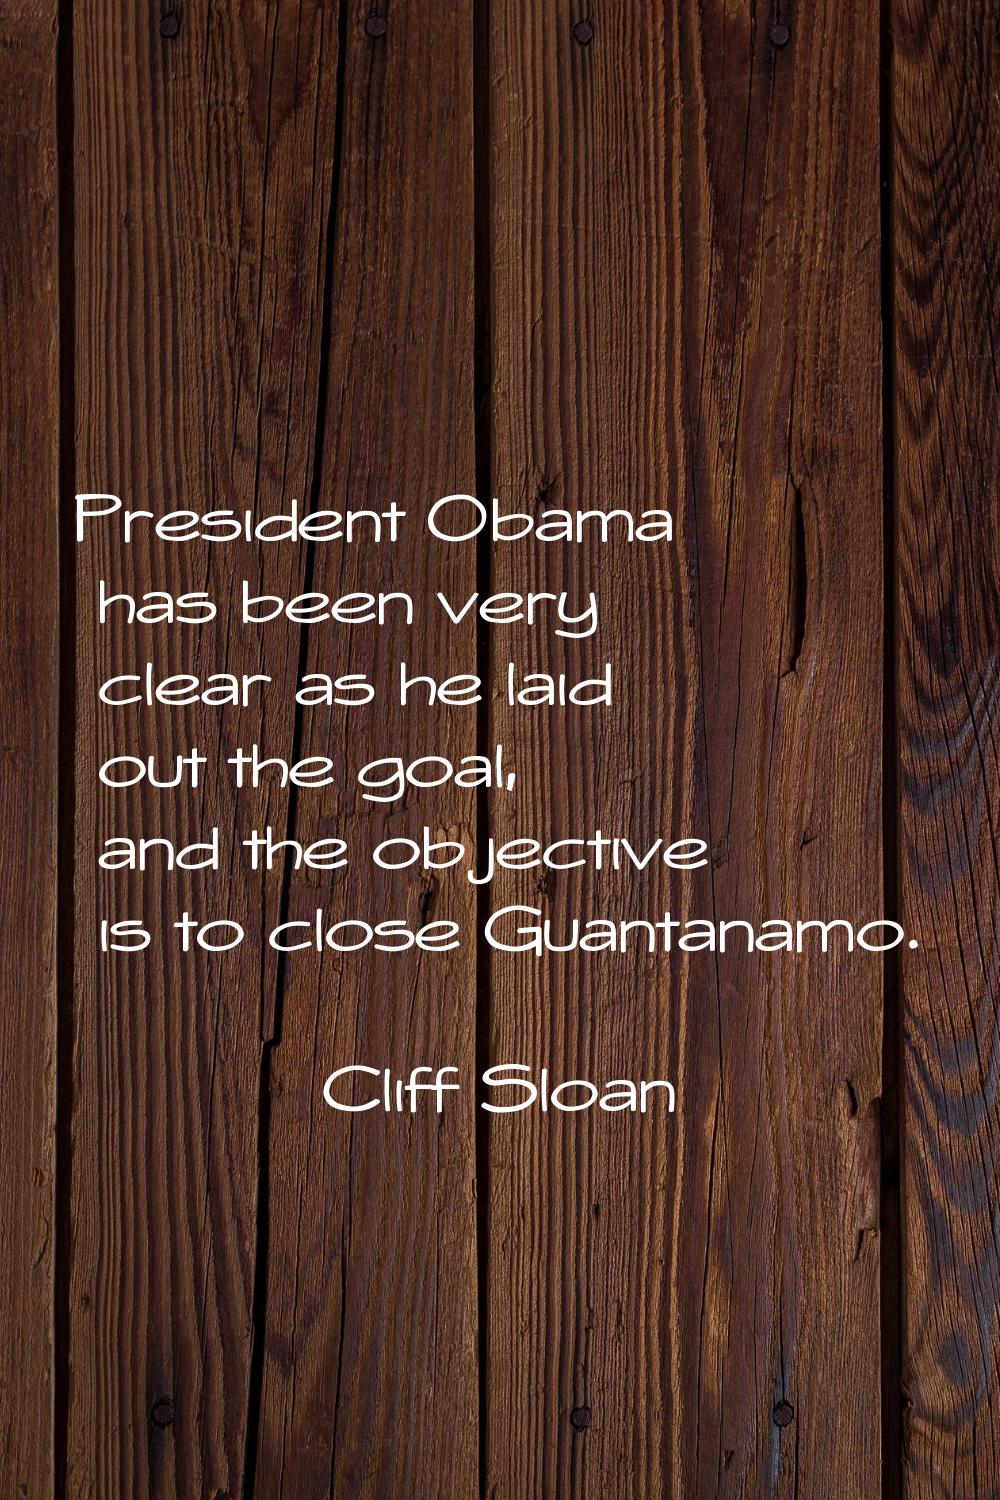 President Obama has been very clear as he laid out the goal, and the objective is to close Guantana